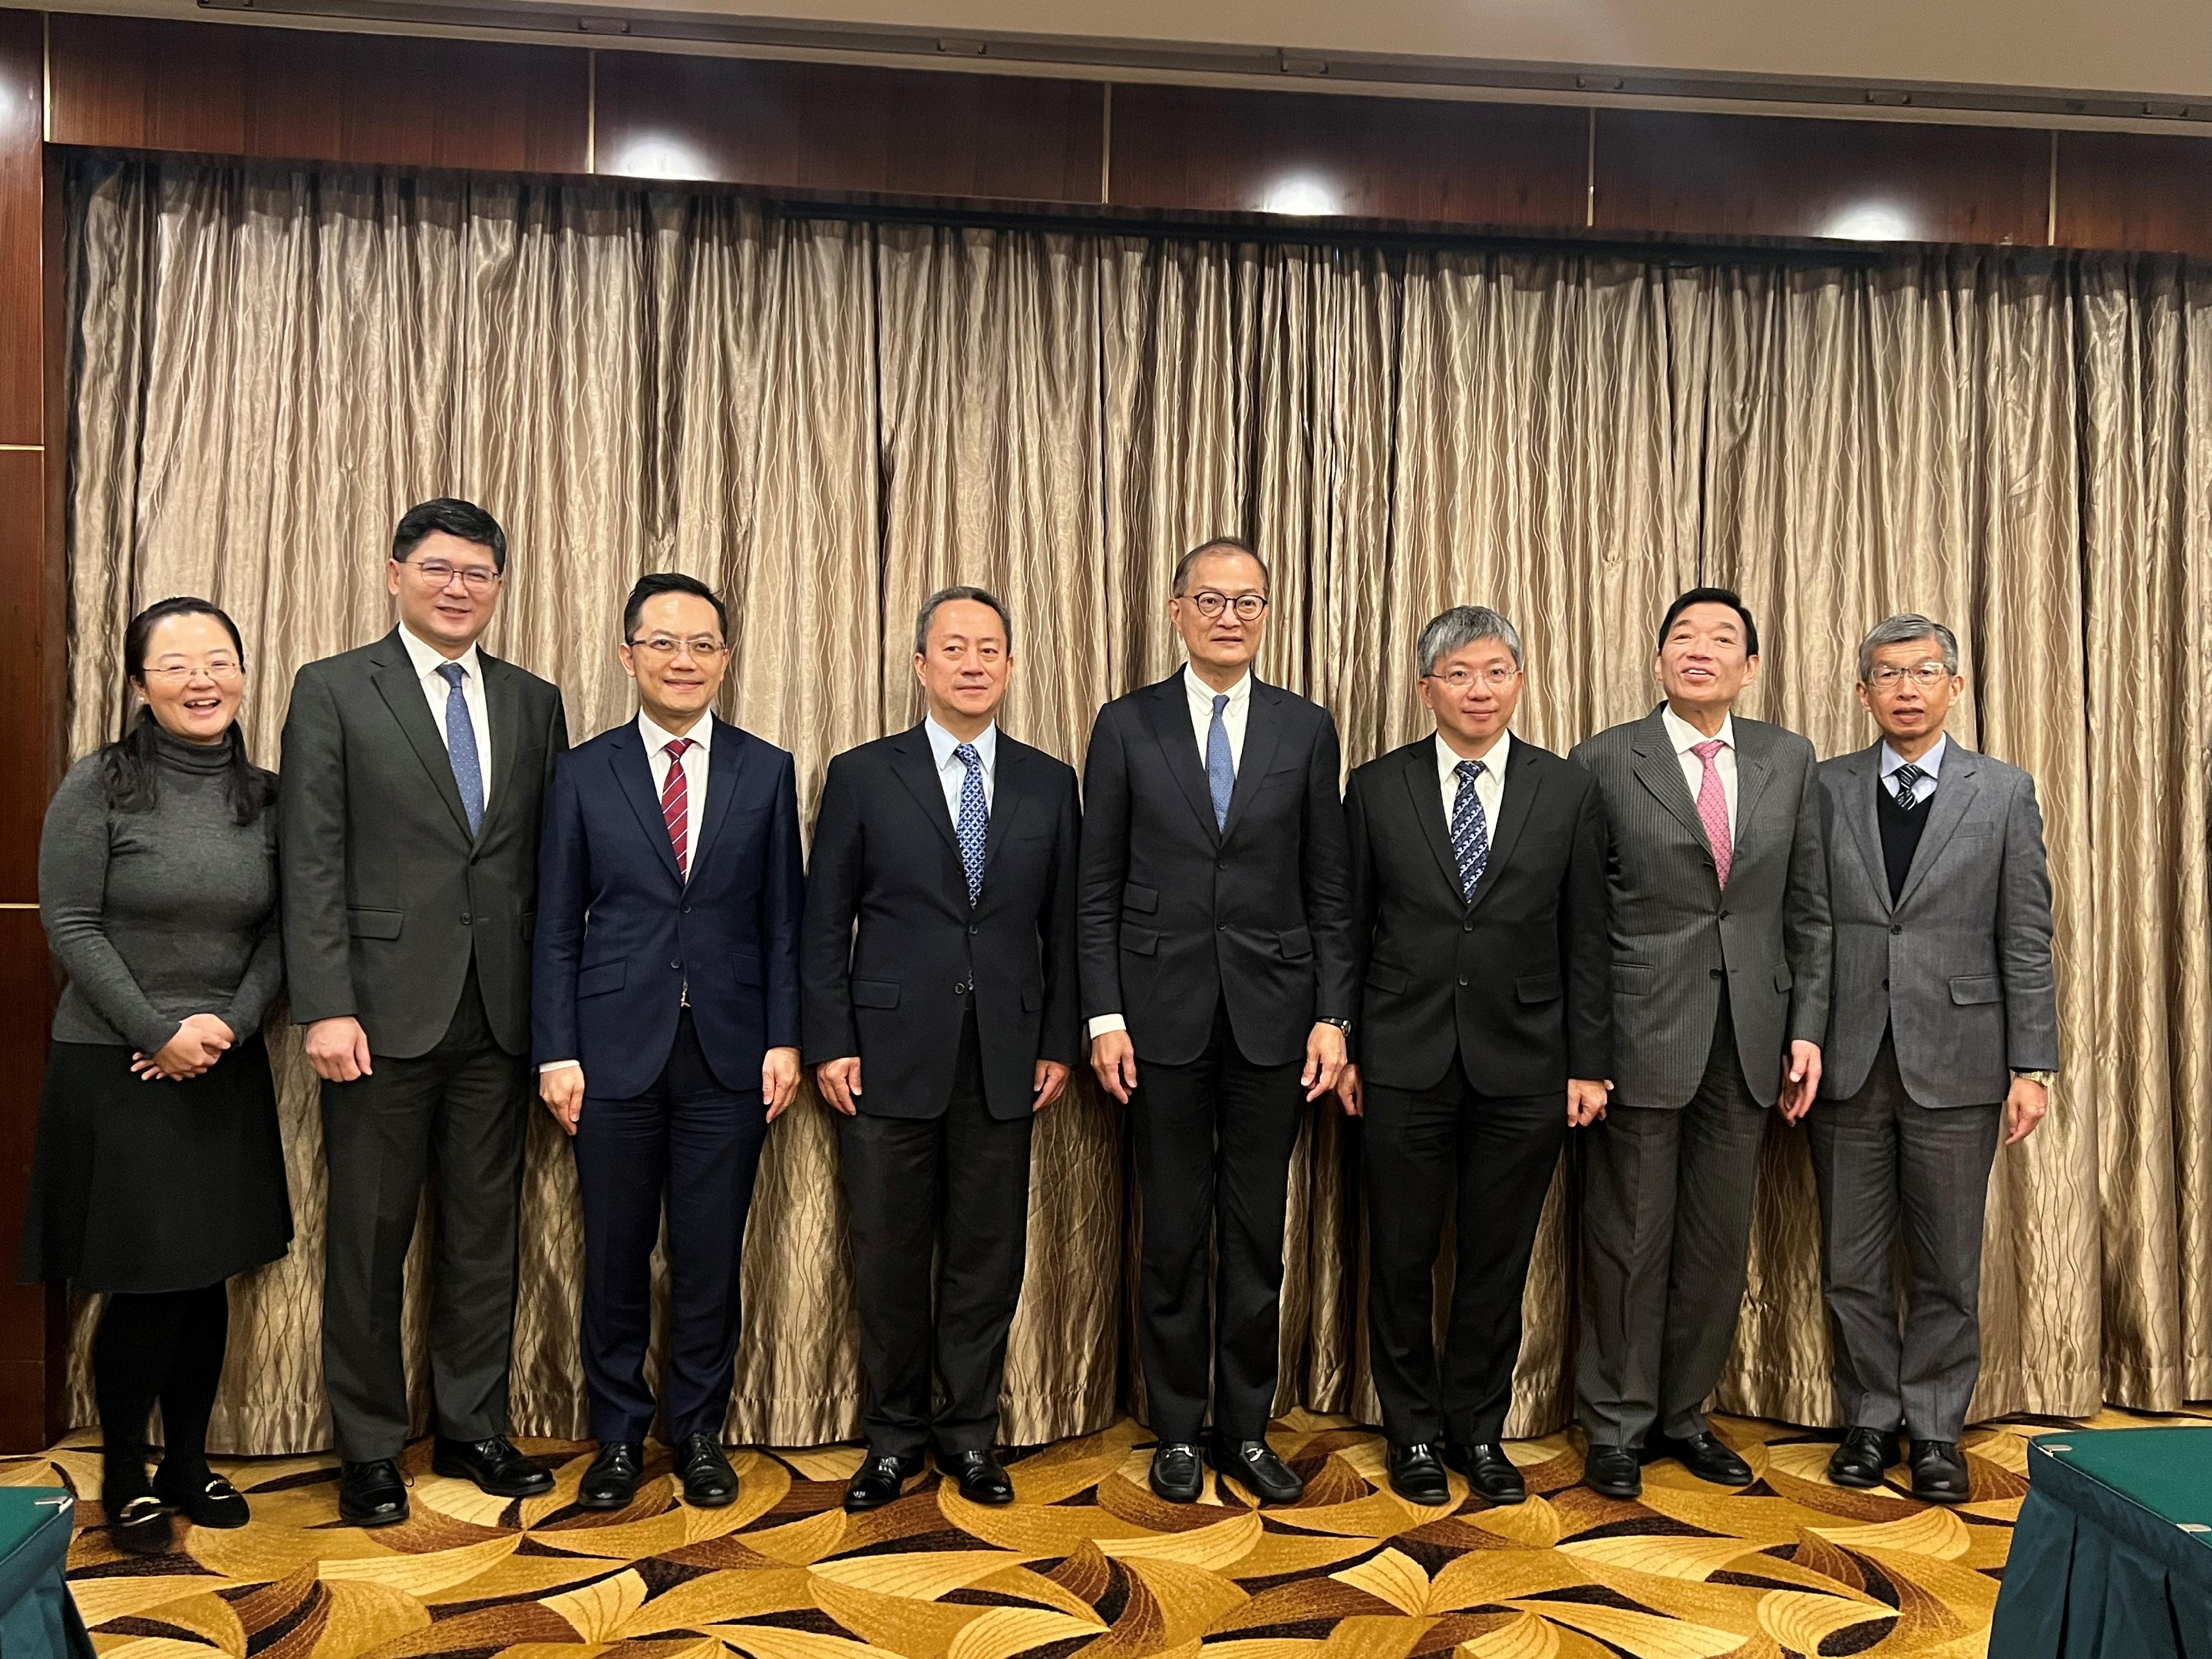 The Secretary for Health, Professor Lo Chung-mau, met with the Deputy Director General of the Office of Hong Kong, Macao and Taiwan Affairs of the National Health Commission, Mr He Shaohua, in Beijing this morning (November 6). Photo shows Professor Lo (fourth right); Mr He (fourth left); the Permanent Secretary for Health, Mr Thomas Chan (third right); the Director of Health, Dr Ronald Lam (third left); the Chairman of the Hospital Authority (HA), Mr Henry Fan (second right); and the Chief Executive of the HA, Dr Tony Ko (second left) after the meeting.